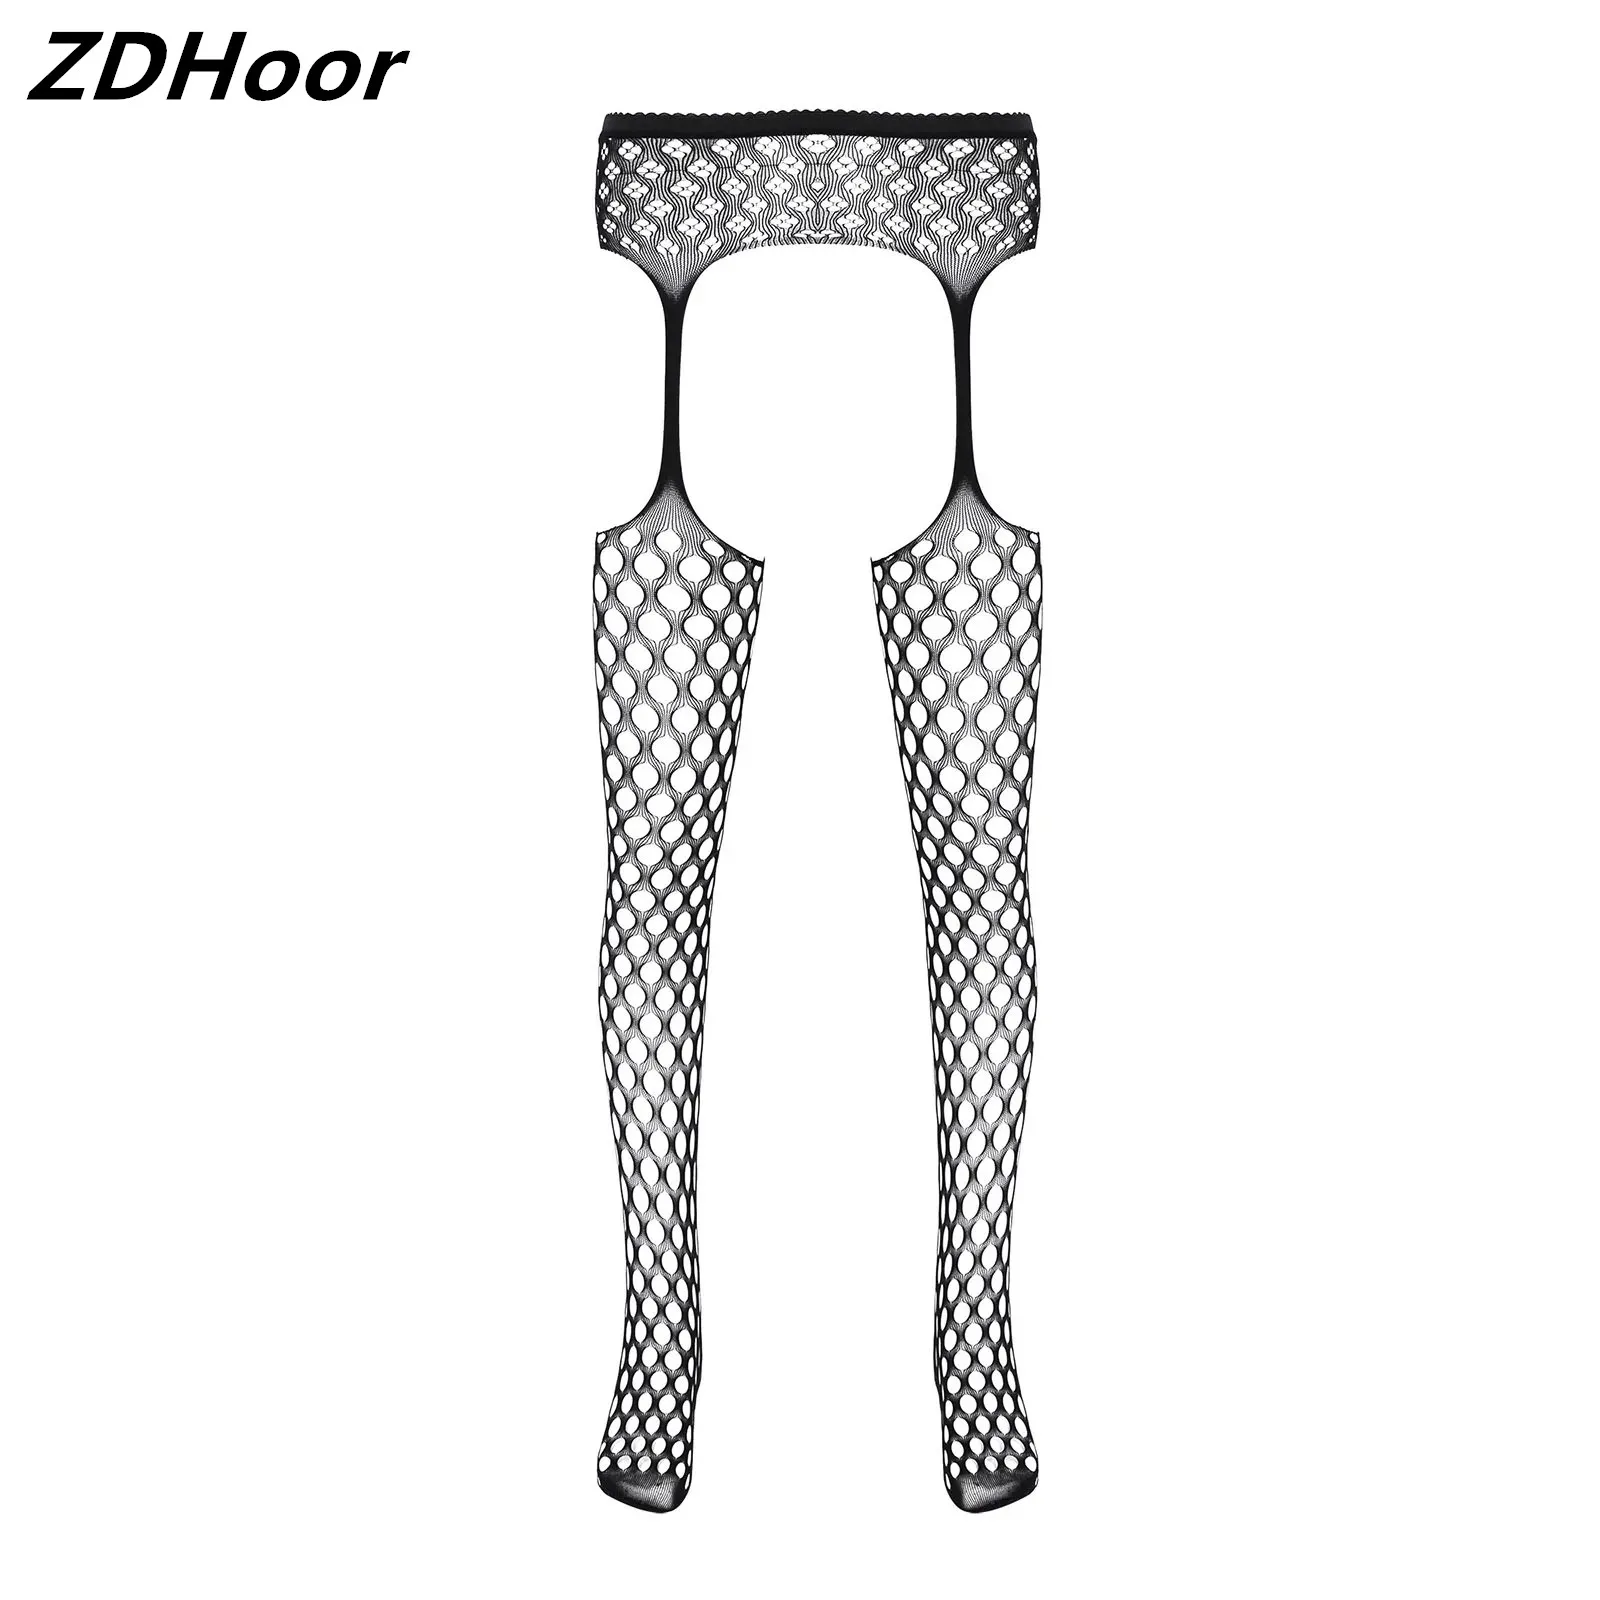 

Stretchy Hollow Out Fishnet Stockings Tights Seethrough Crotchless Pantyhose Nightwear for Lingerie Night Club Stage Performance